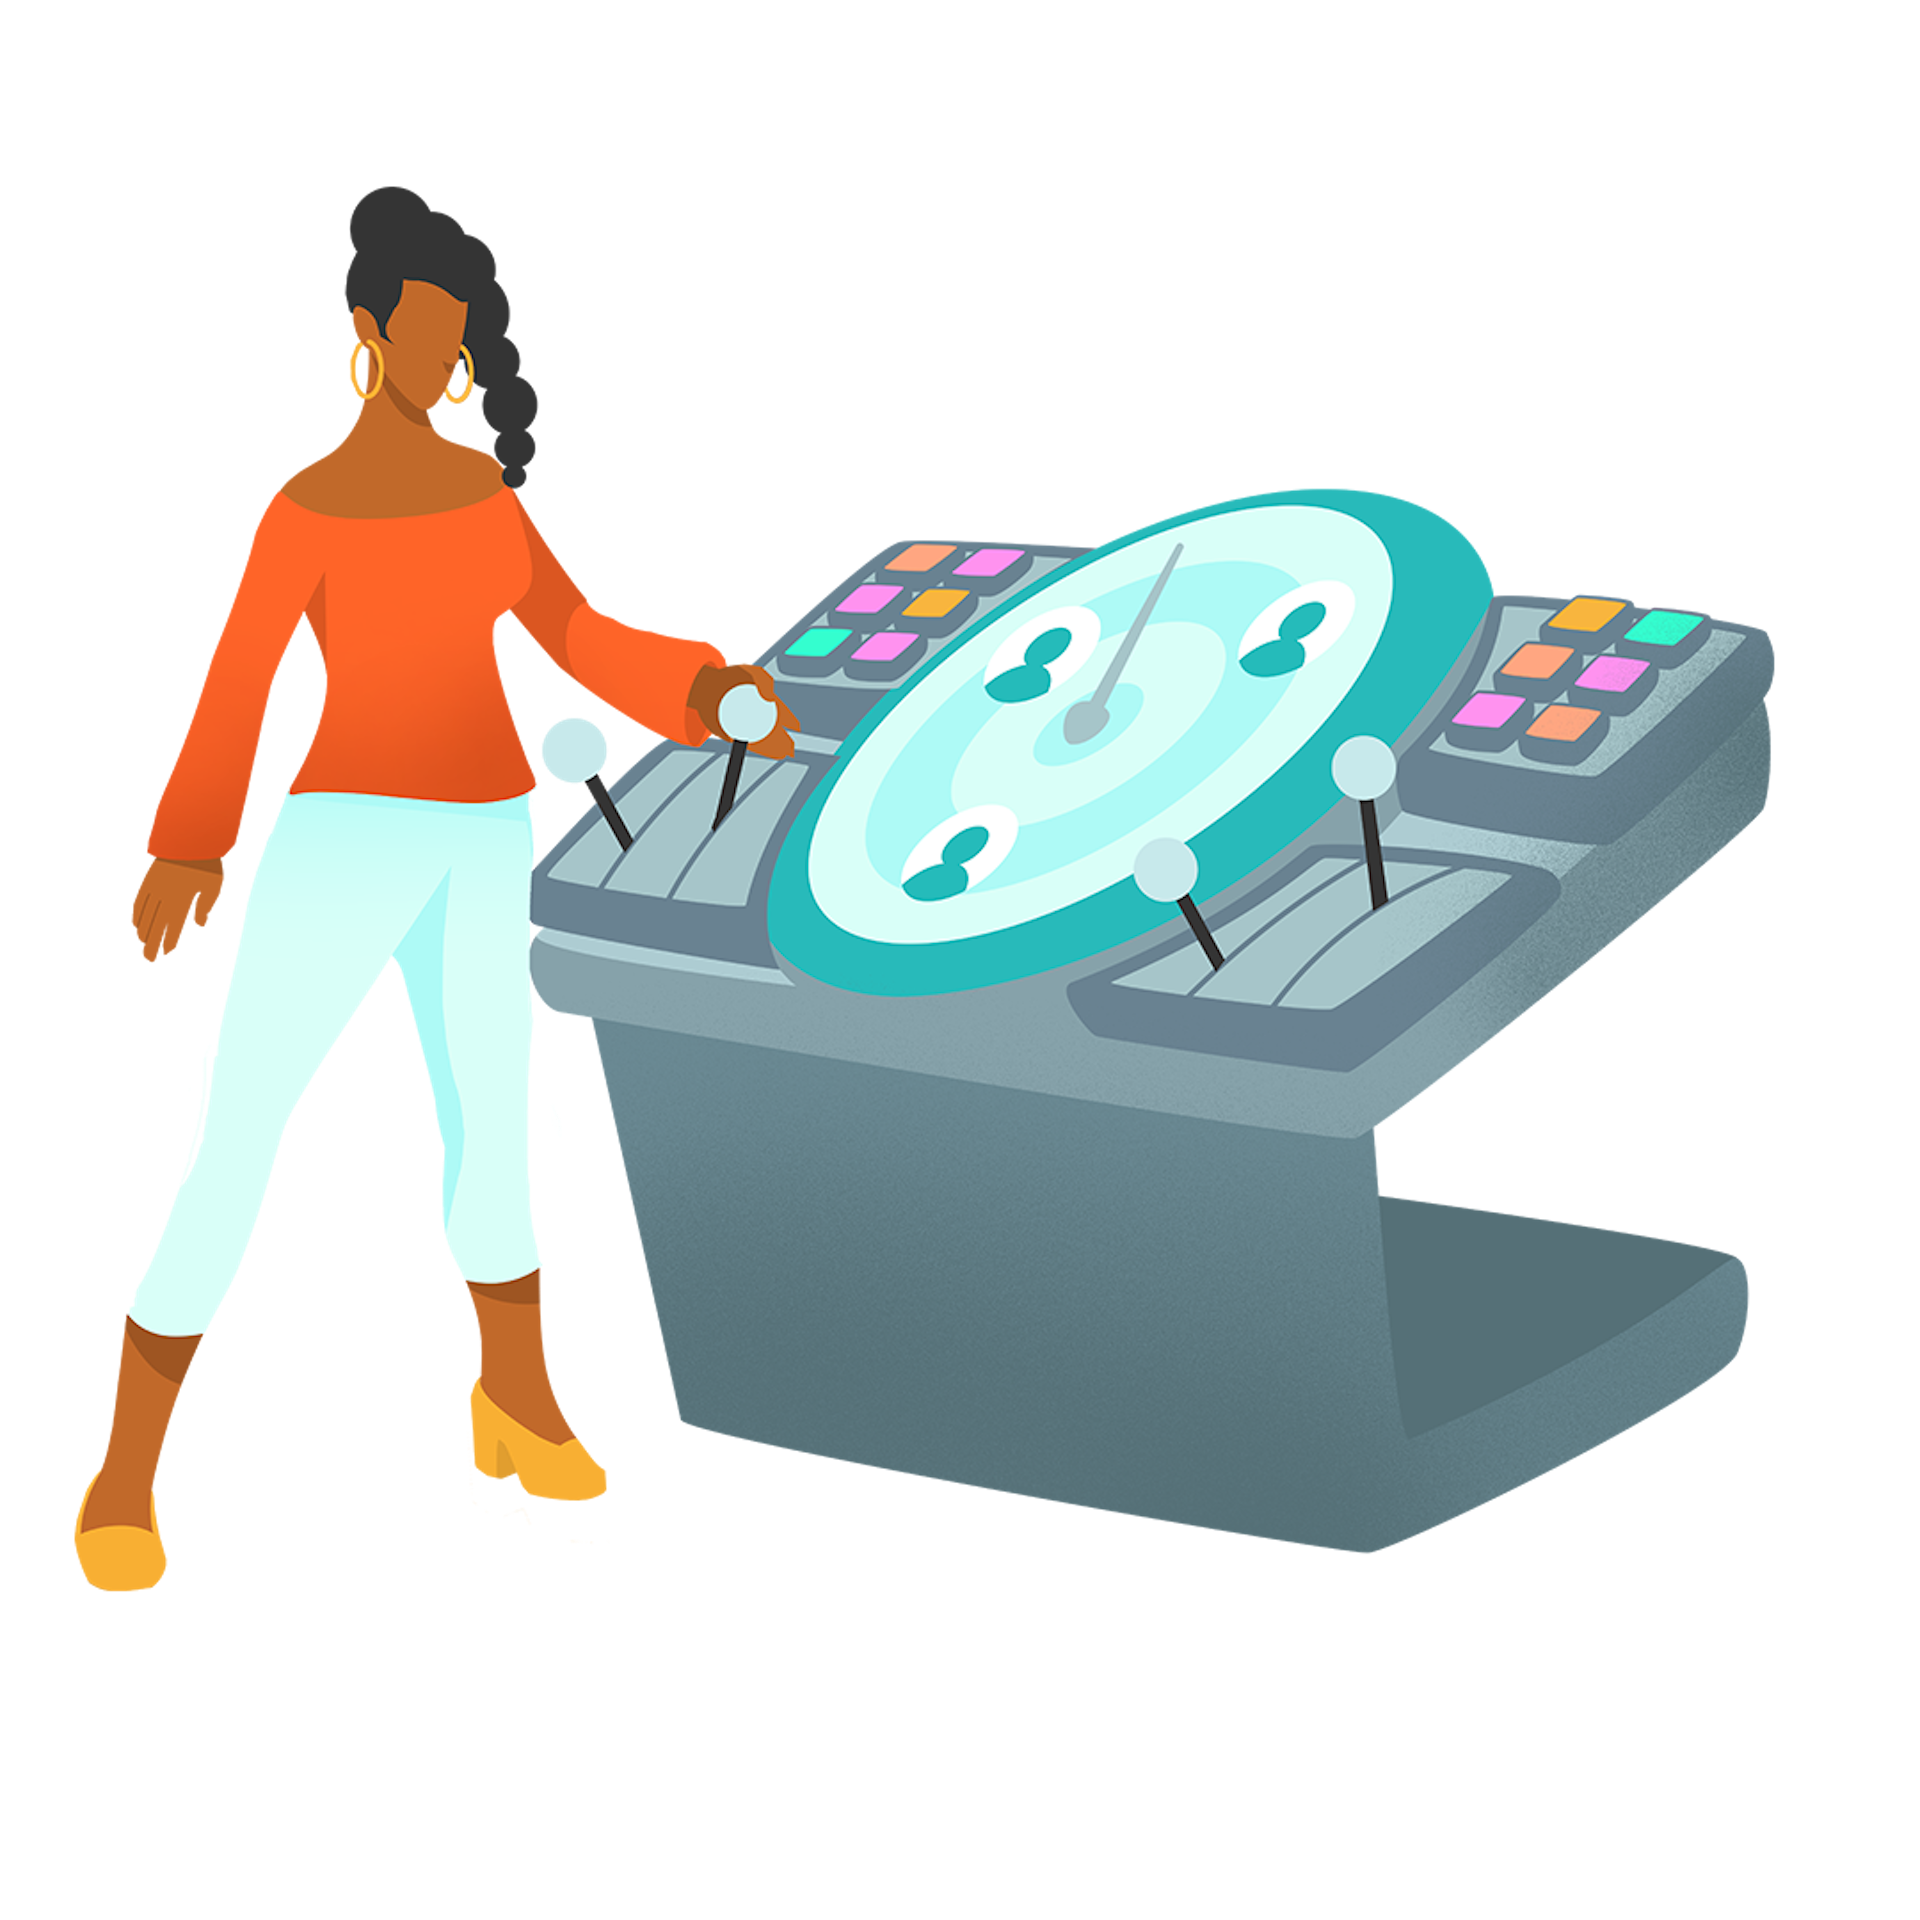 Graphic illustration of woman with a controller